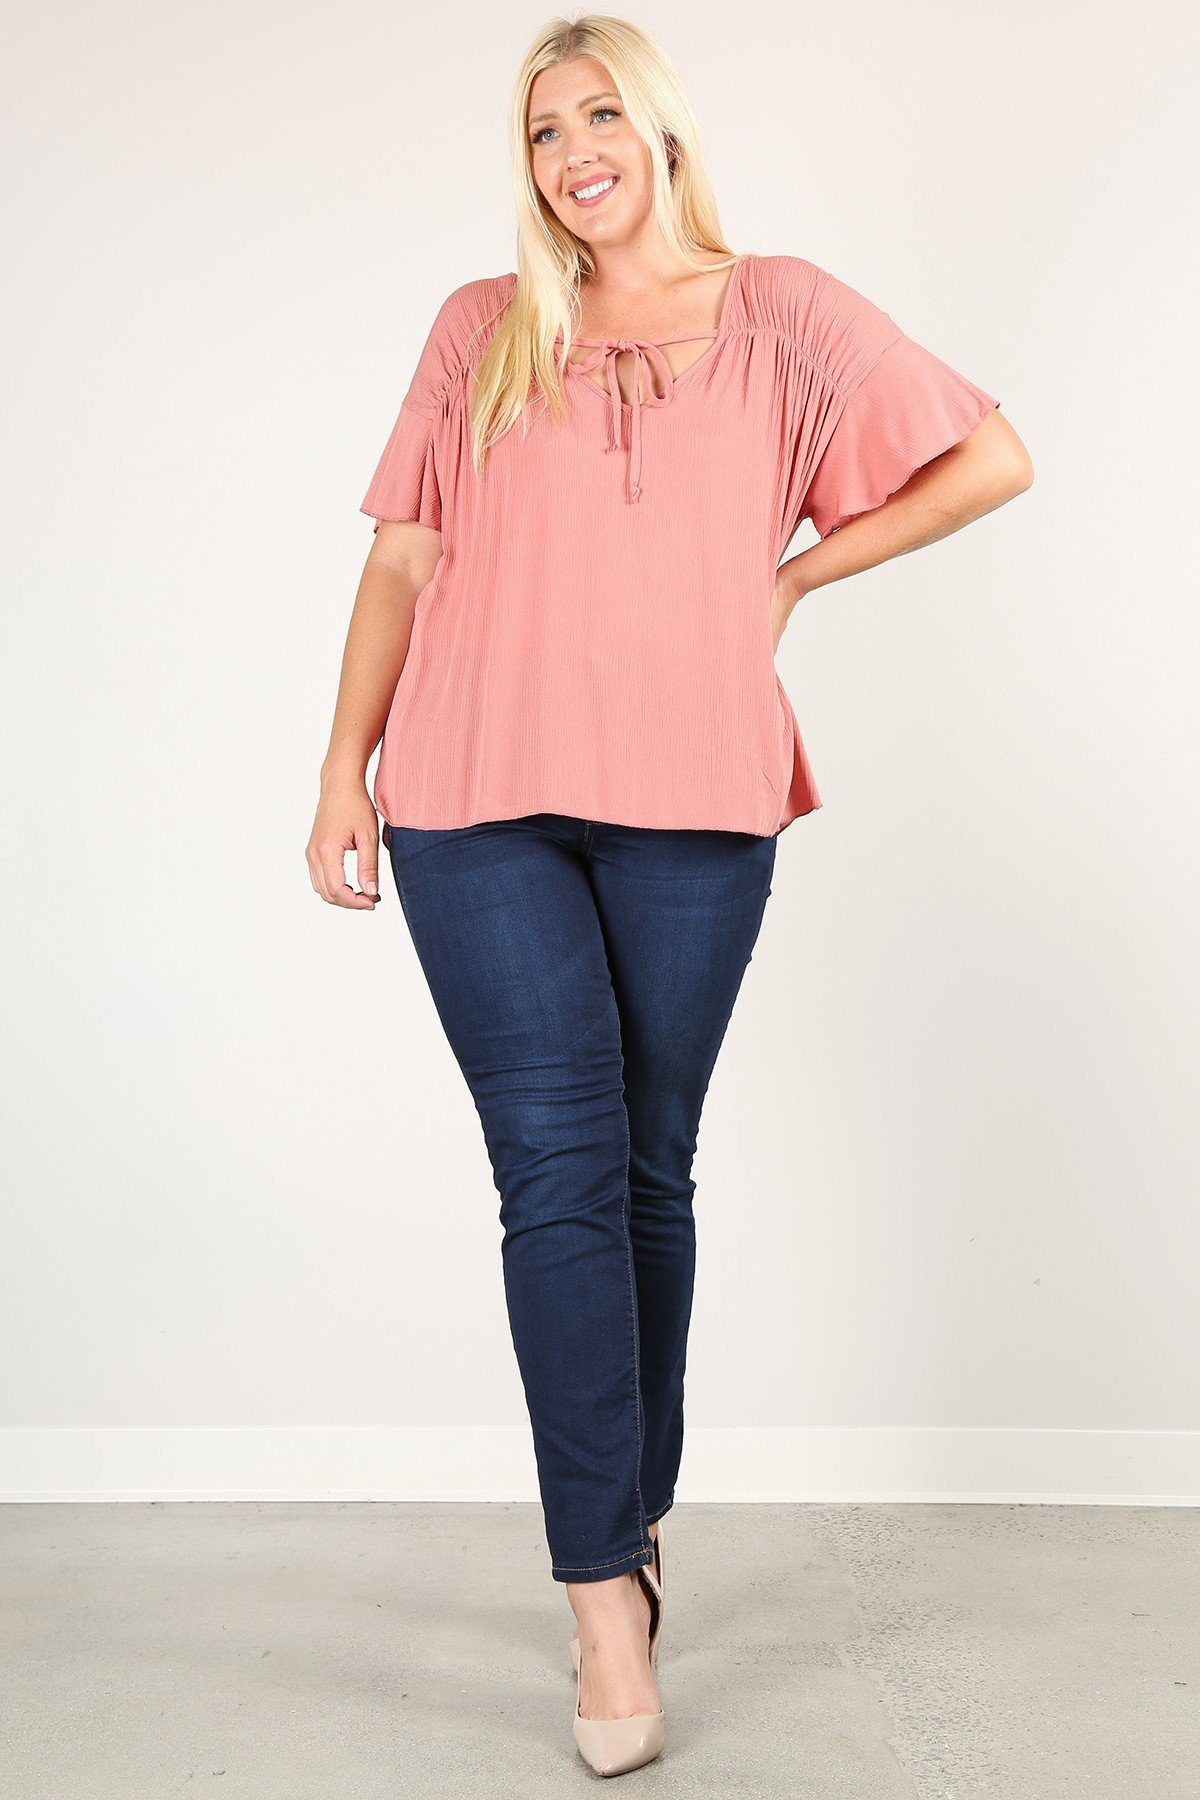 Plus Size Solid Top With A Necktie, Pleated Detail, And Flutter Sleeves | us.meeeshop